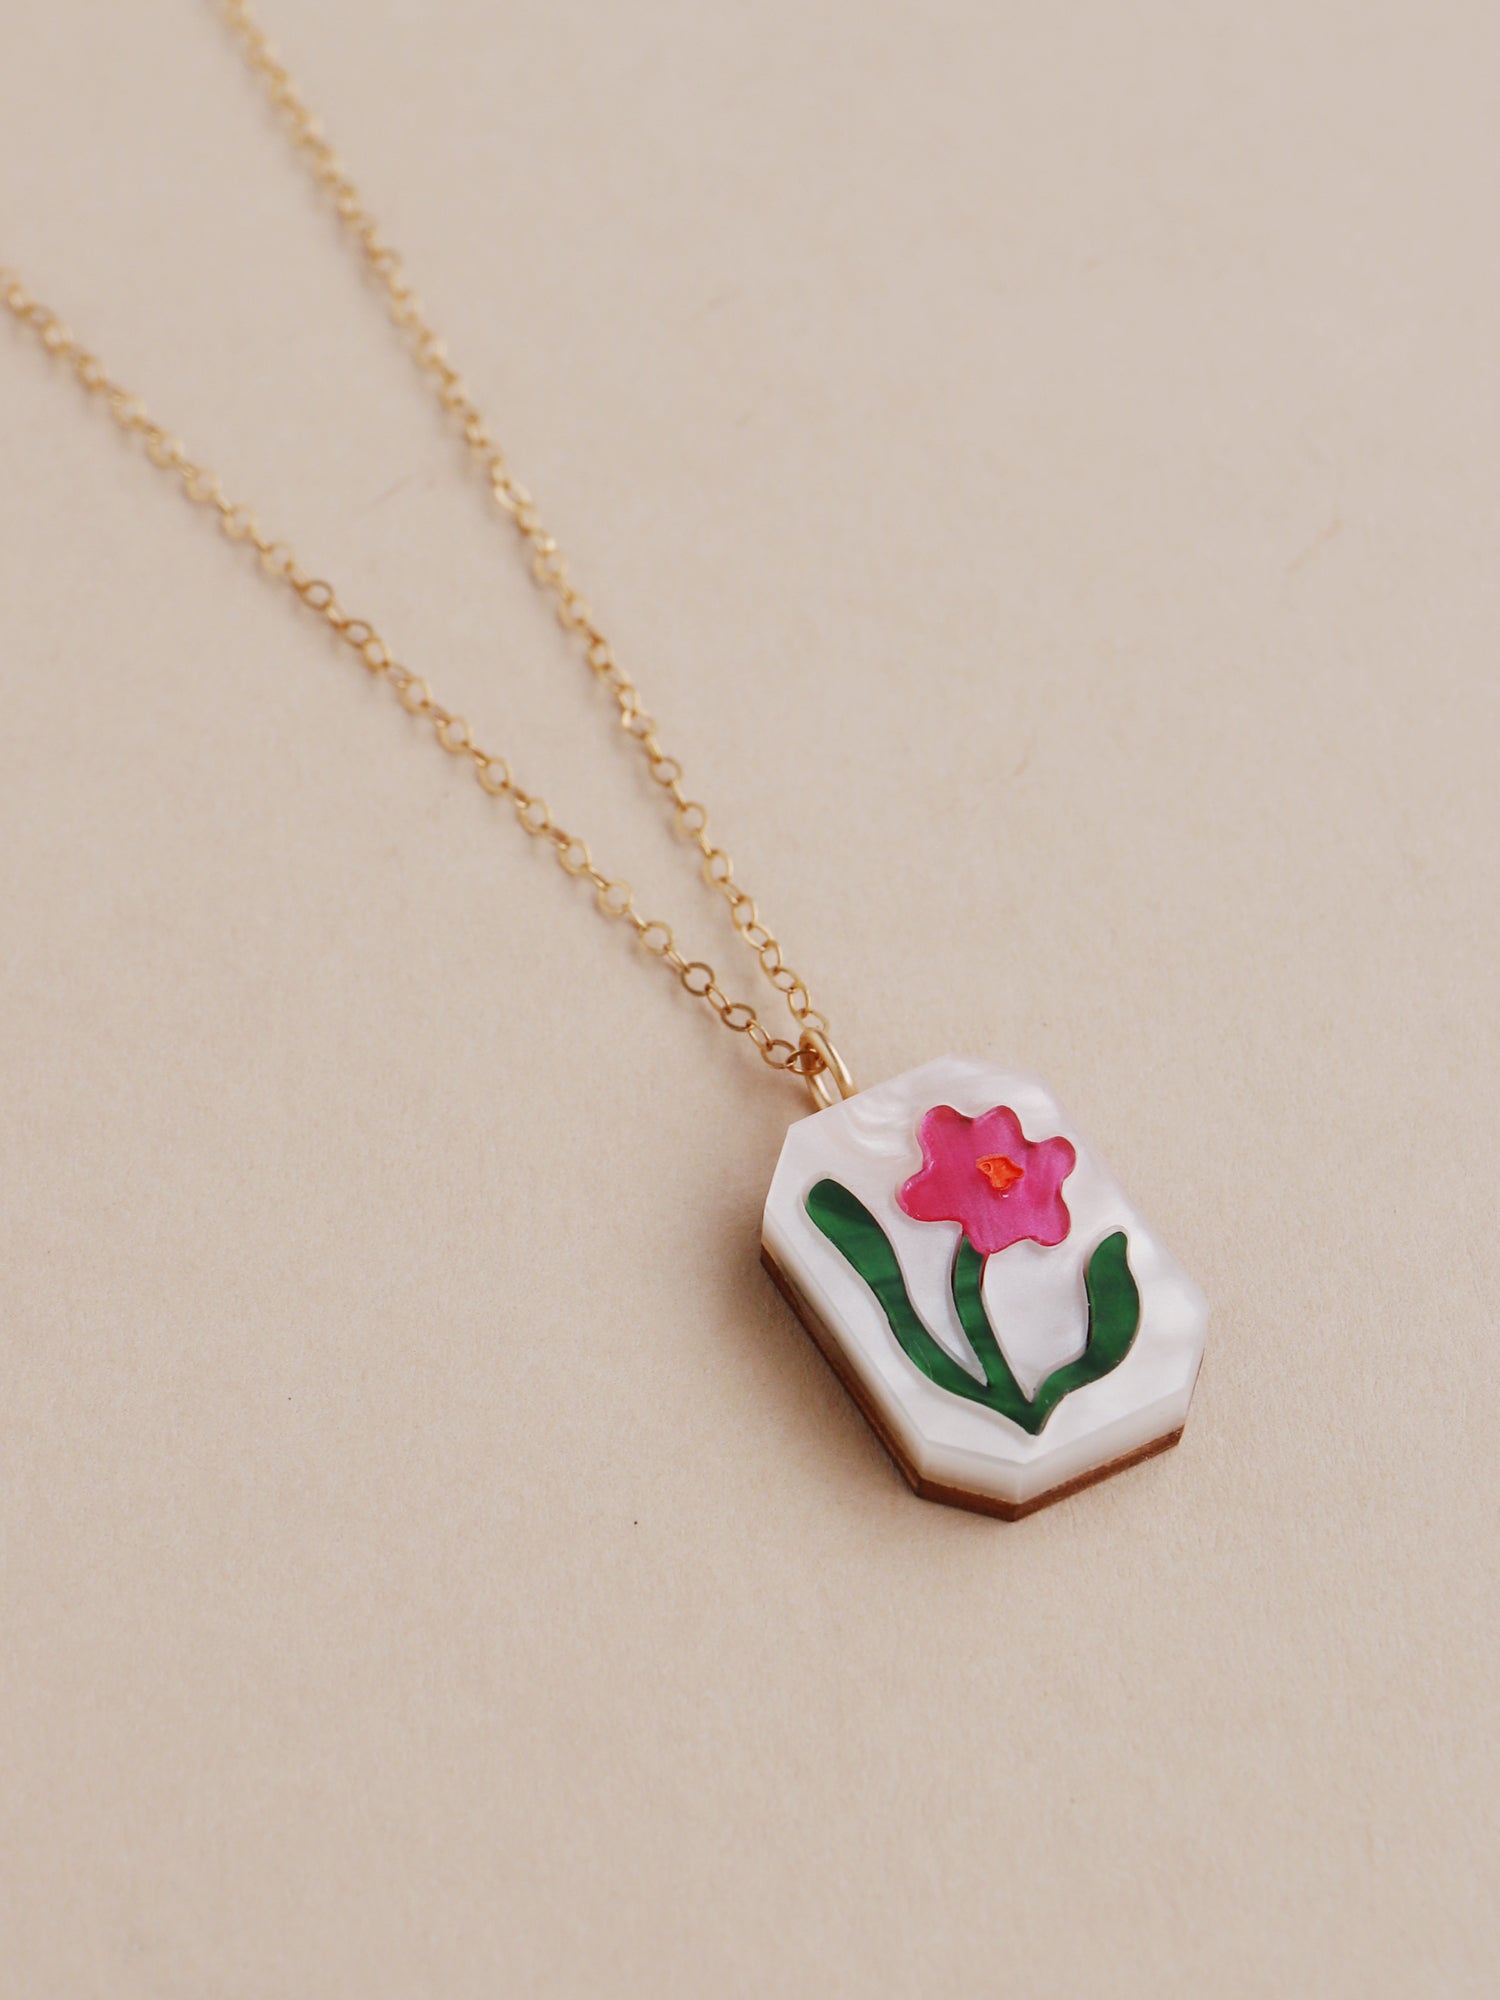 Flower charm necklace made from acrylic and a 14k gold-filled chain & findings. Handmade in the UK by Wolf & Moon